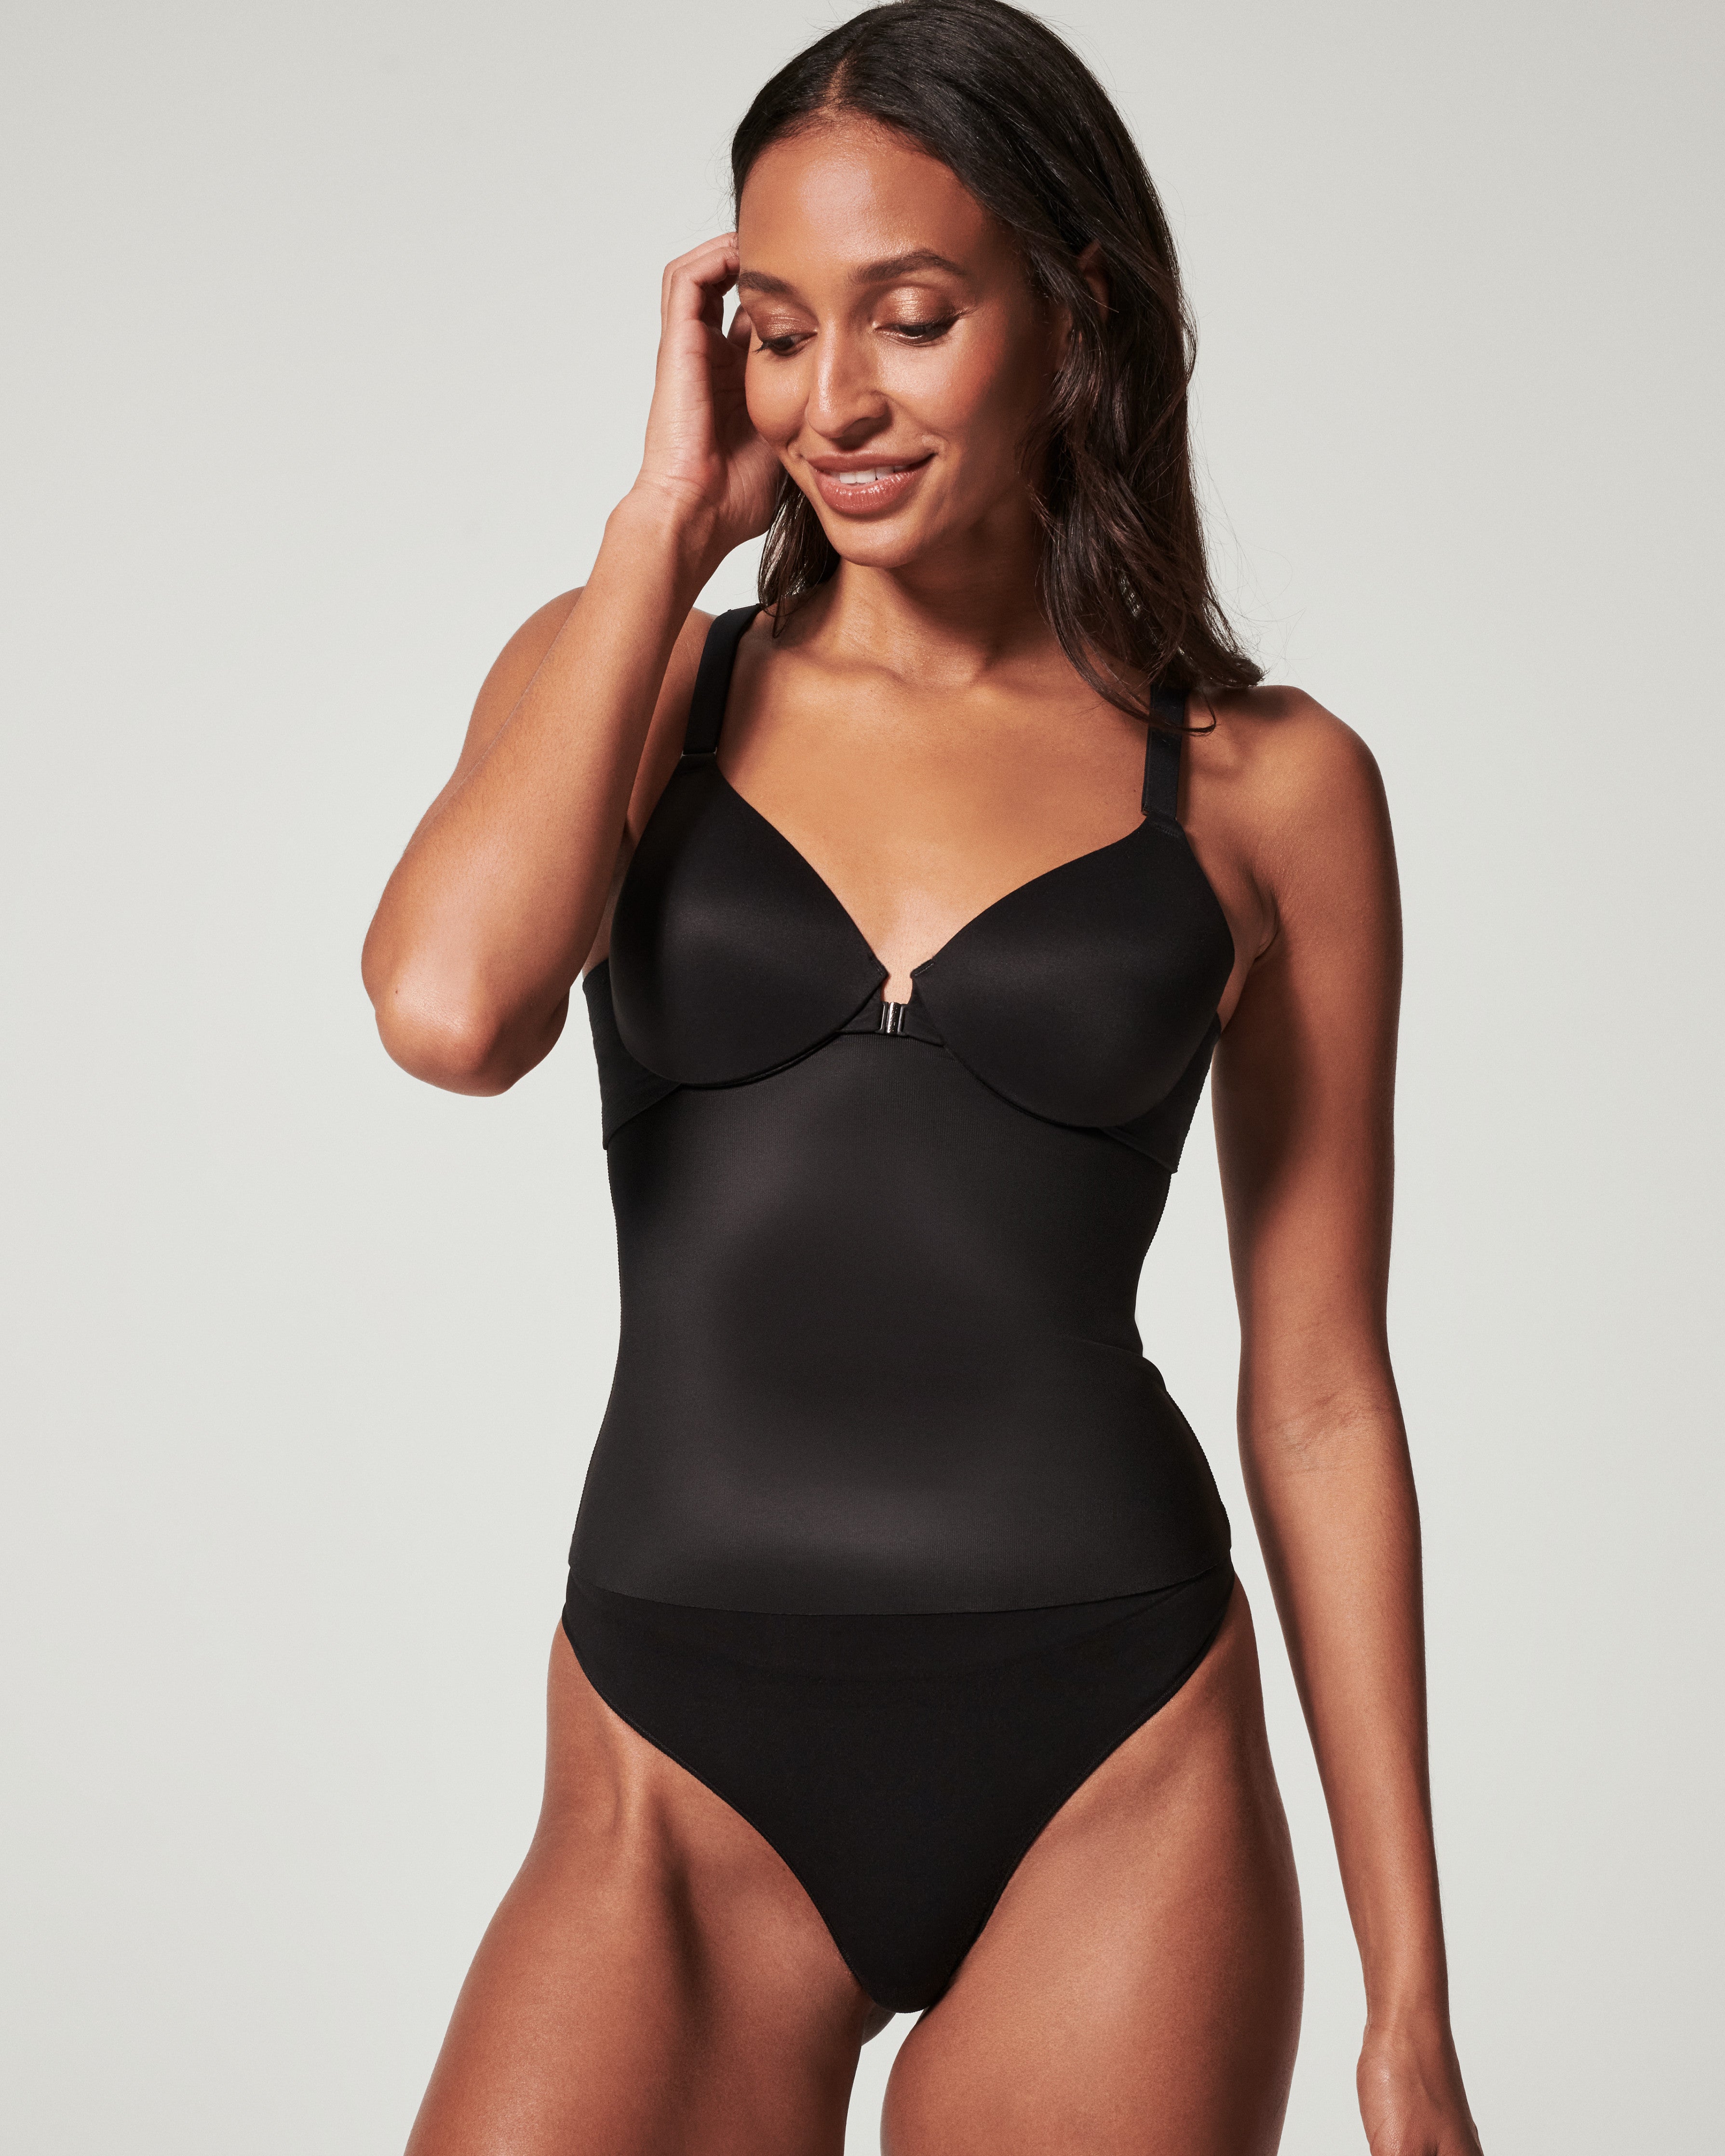 SPANX - Say yes to the dress and to Spanx shapewear! #Spanx